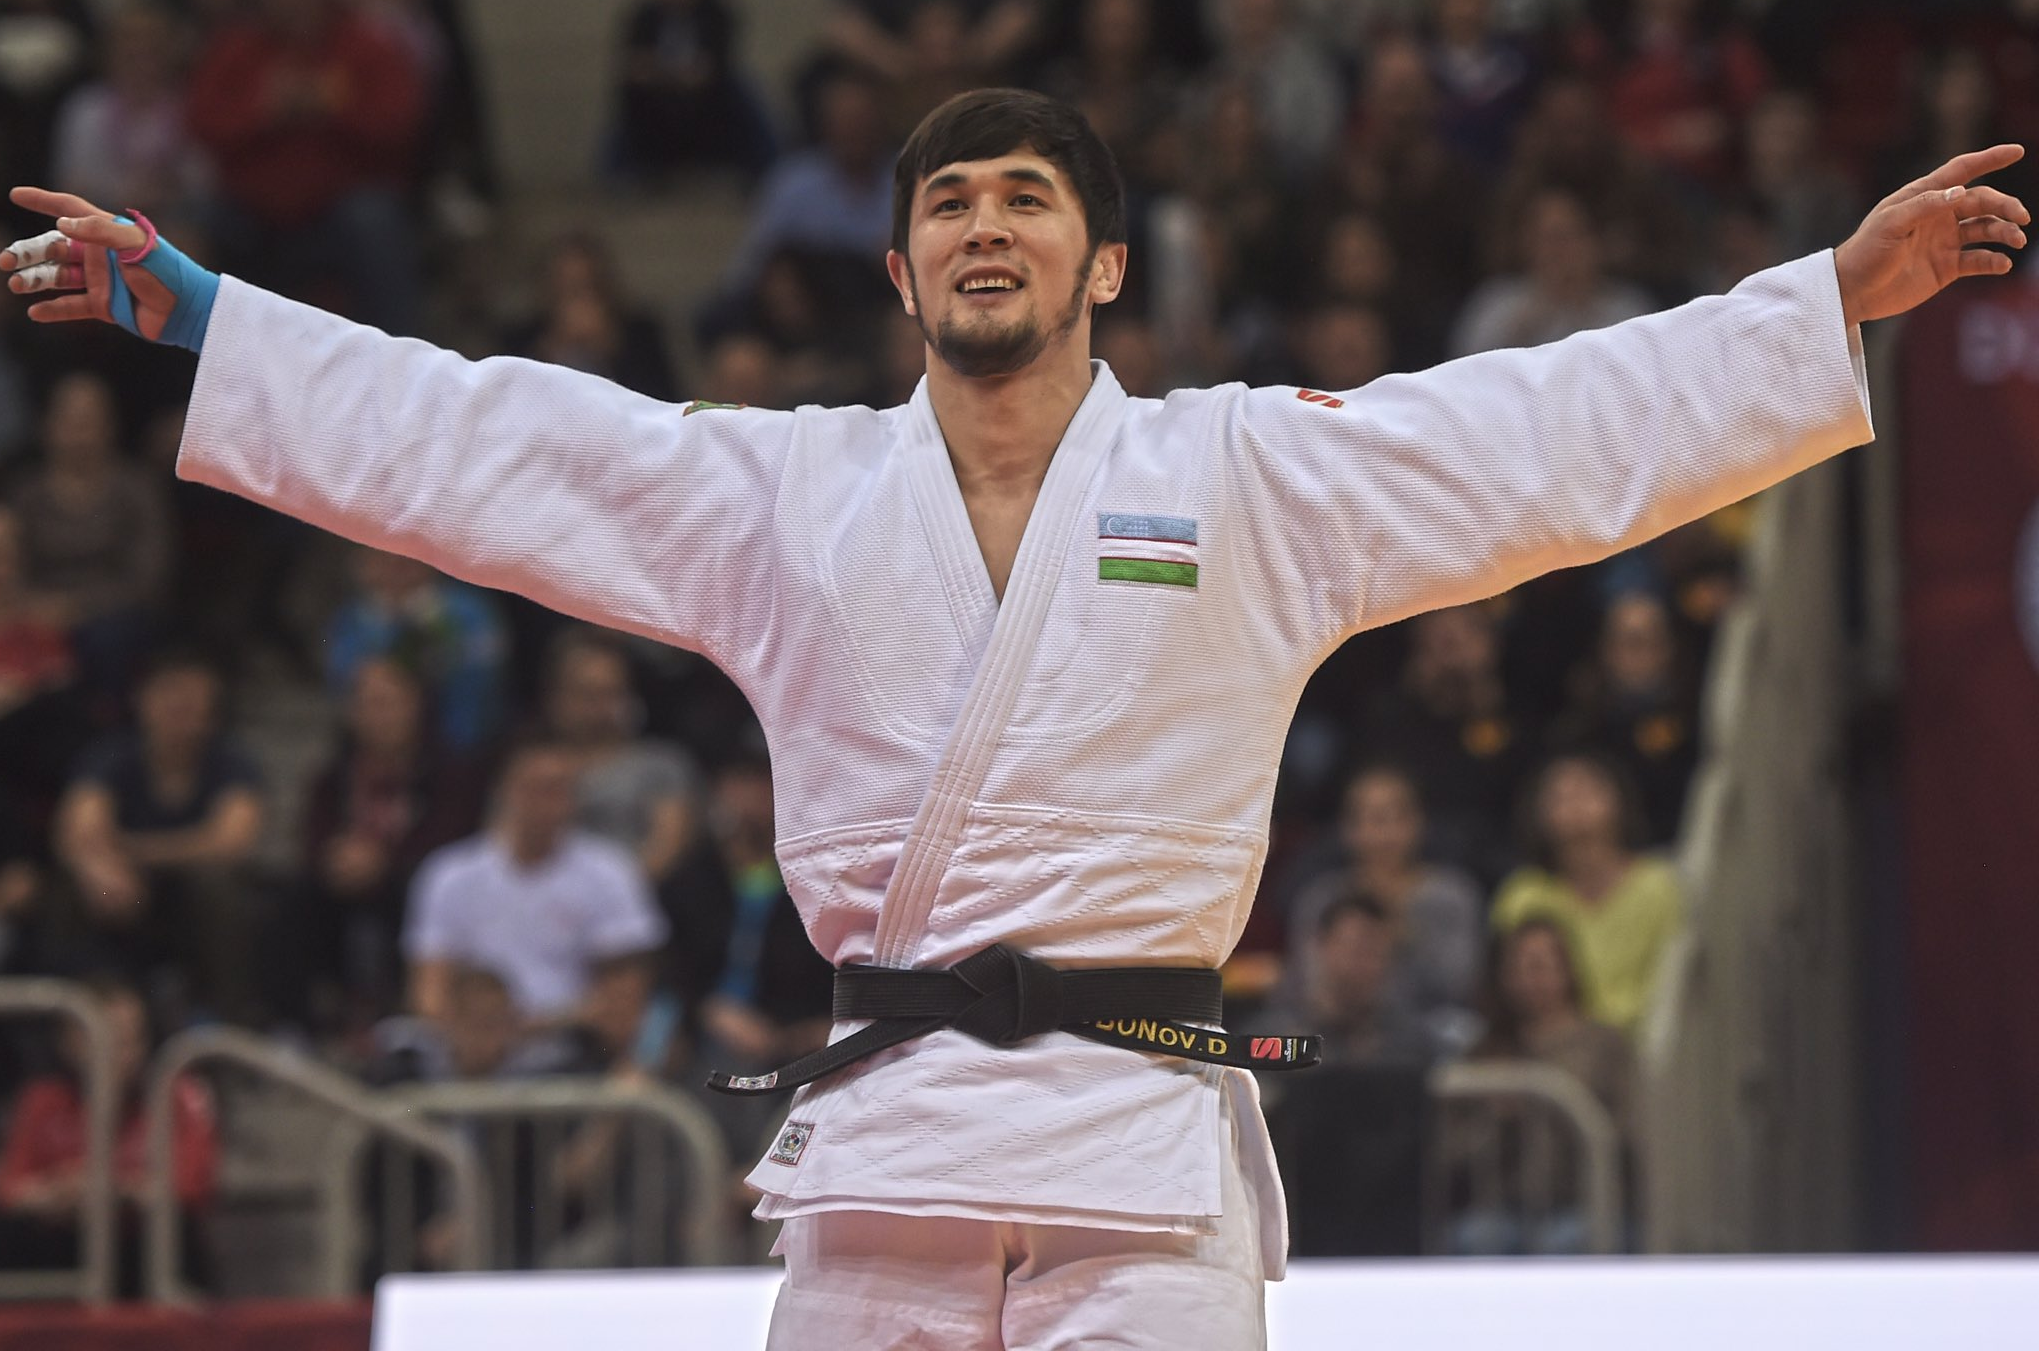 Uzbekistan celebrated two gold medals on the final day of action ©IJF